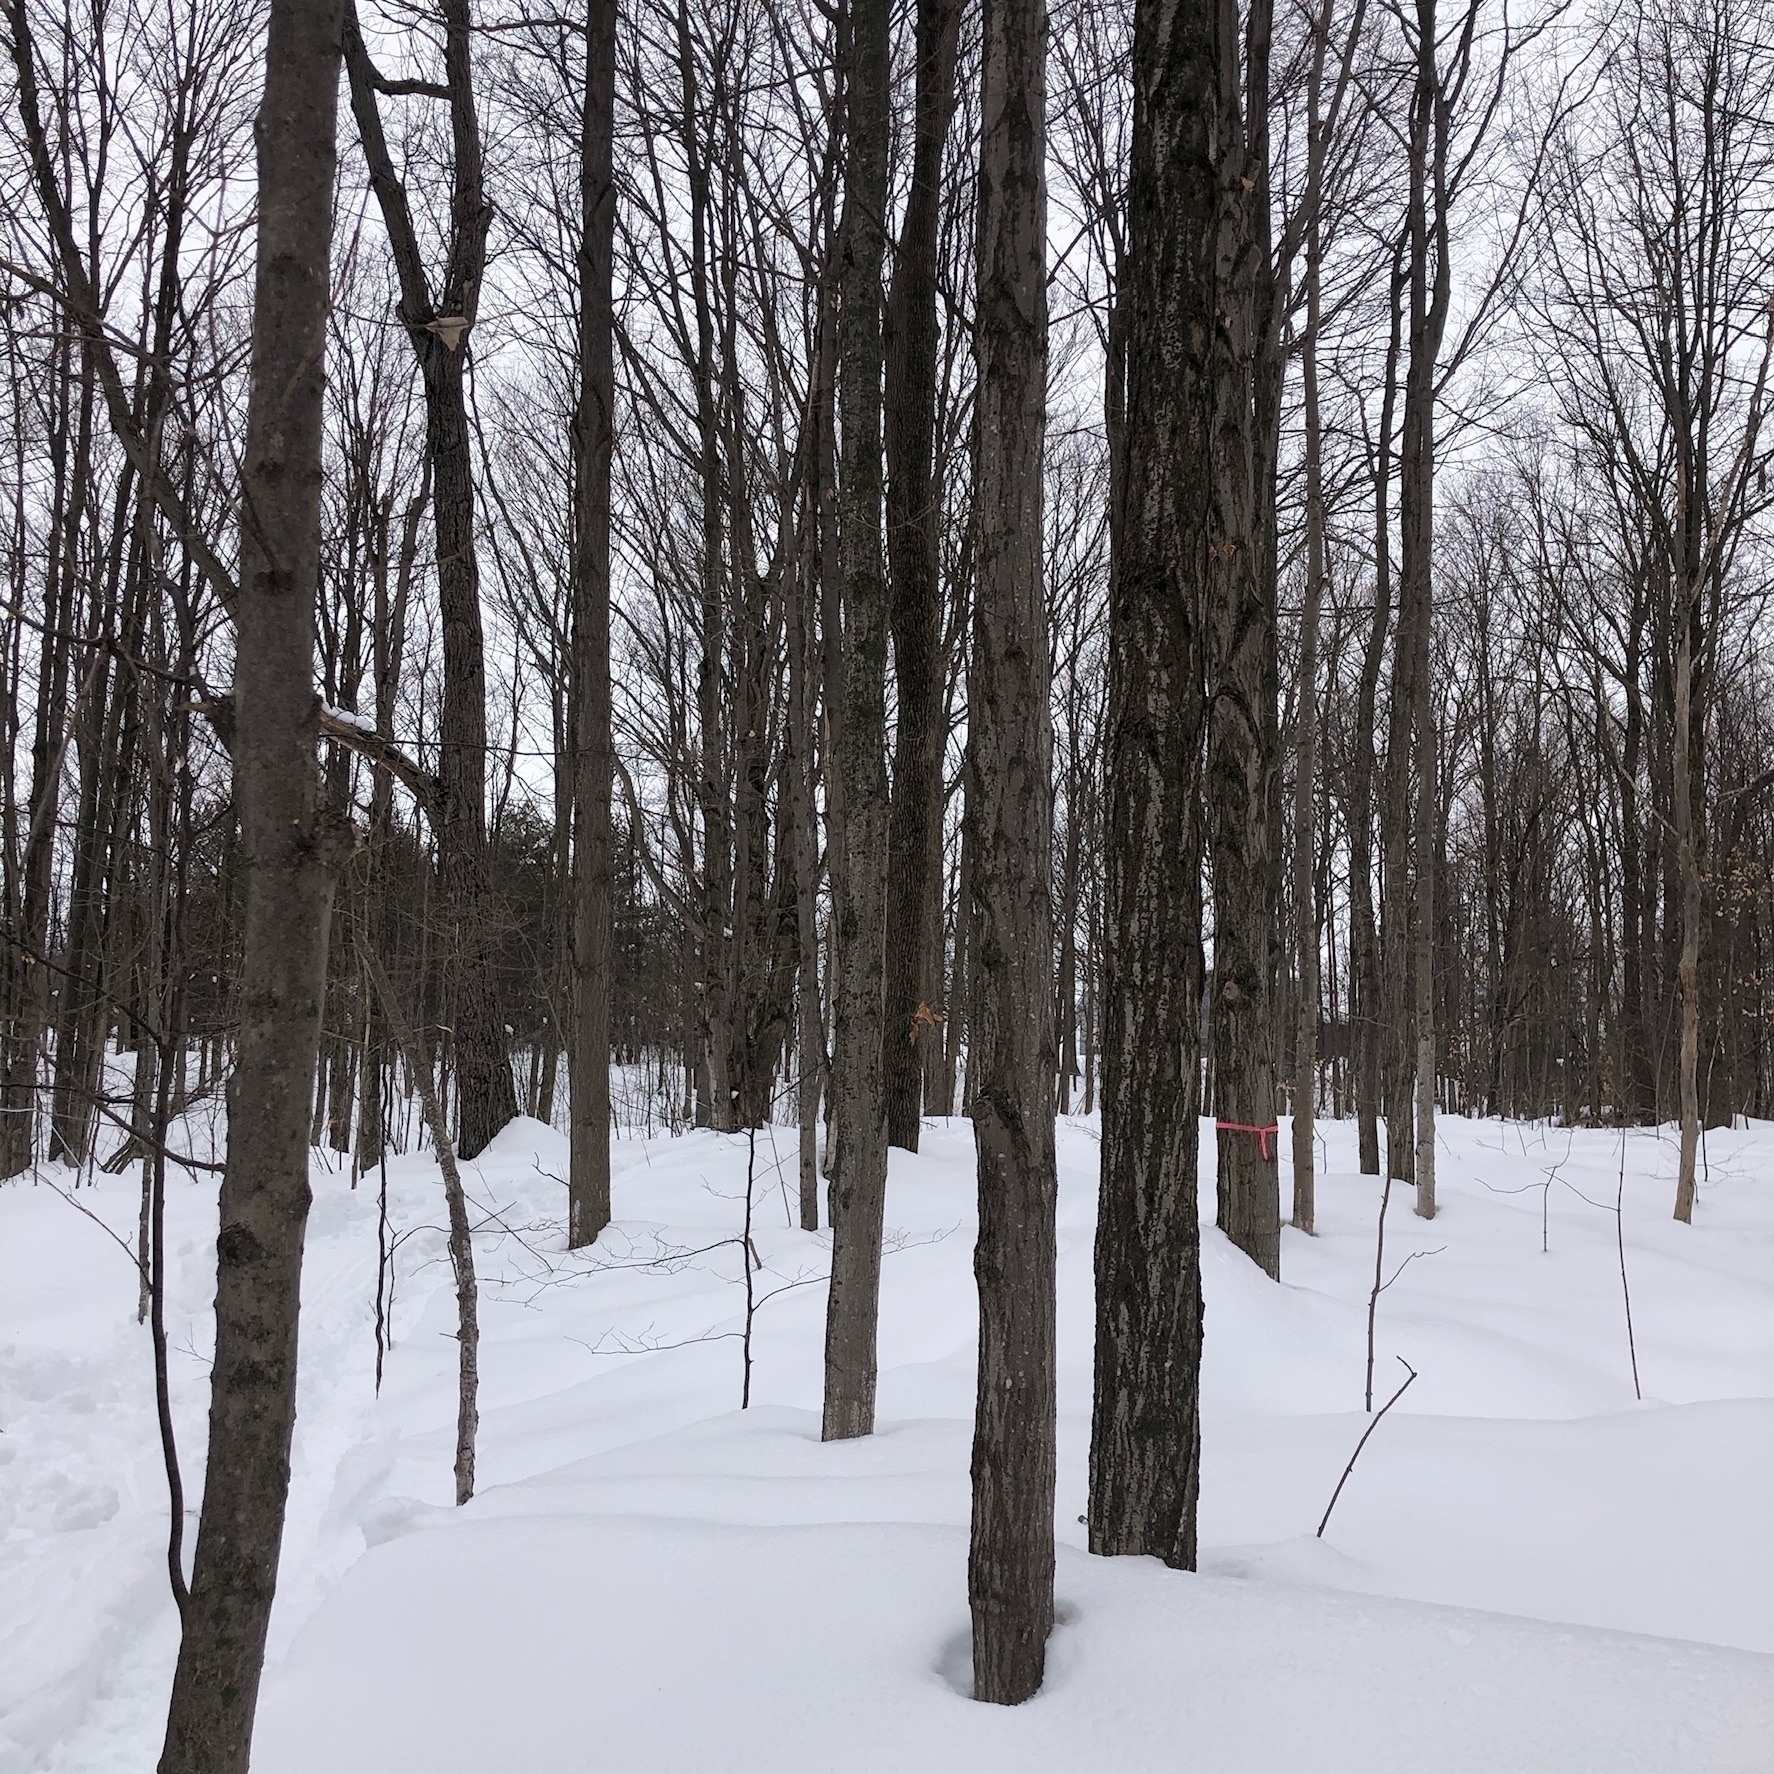 various size trees. the ground is snow-covered